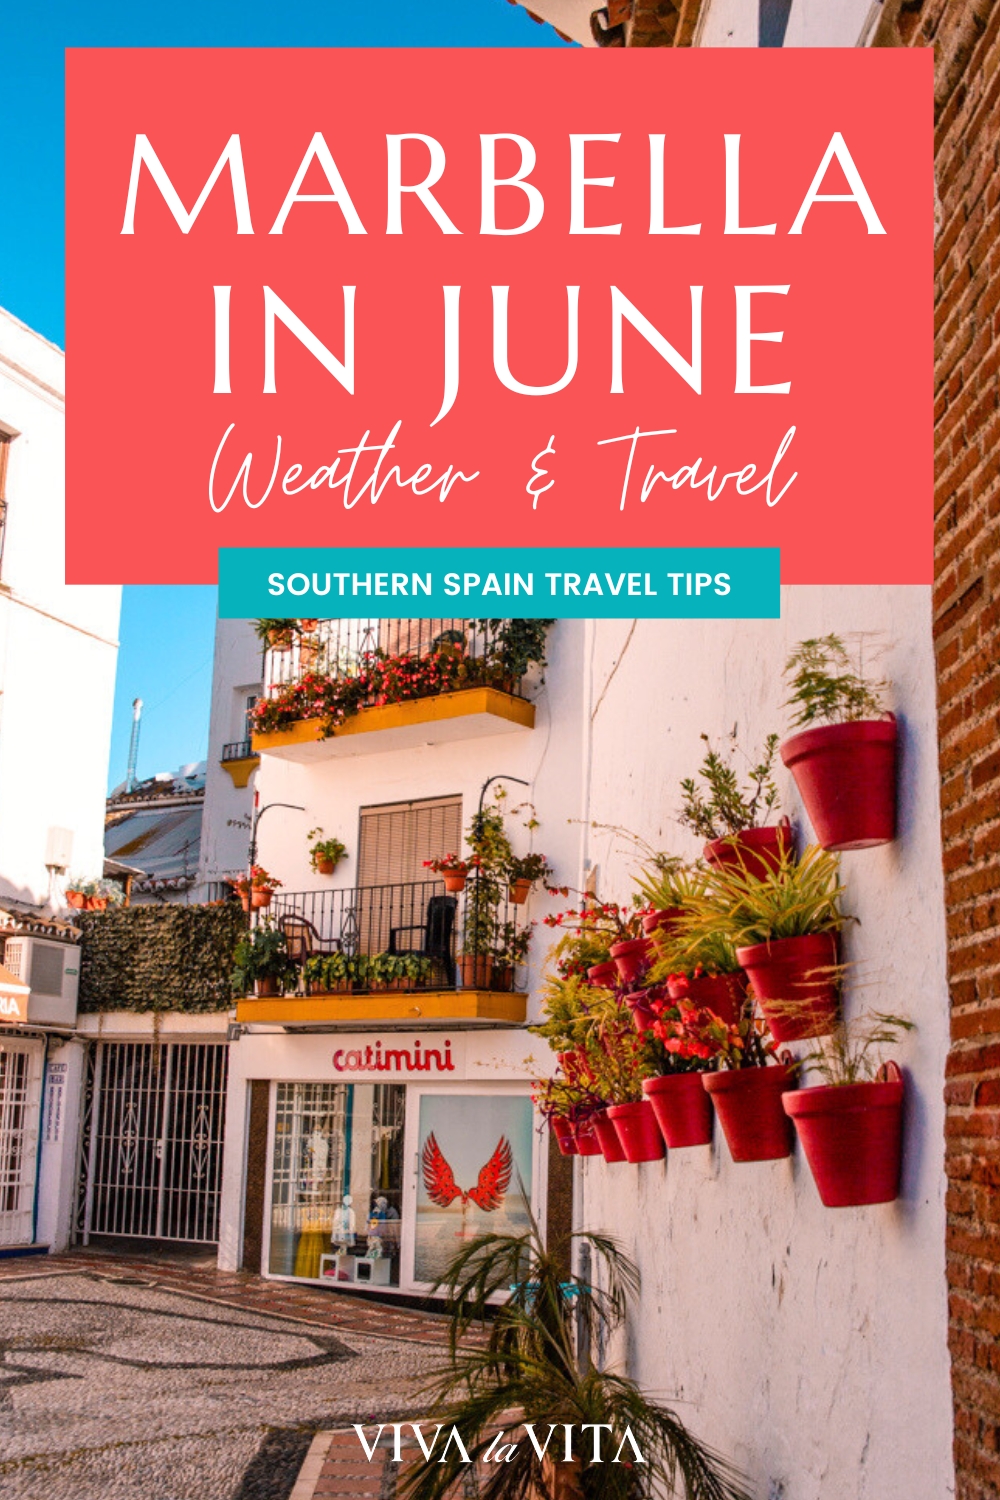 pinterest image showing the old town of marbella with a headline - marbella in june weather and travel, southern spain travel tips